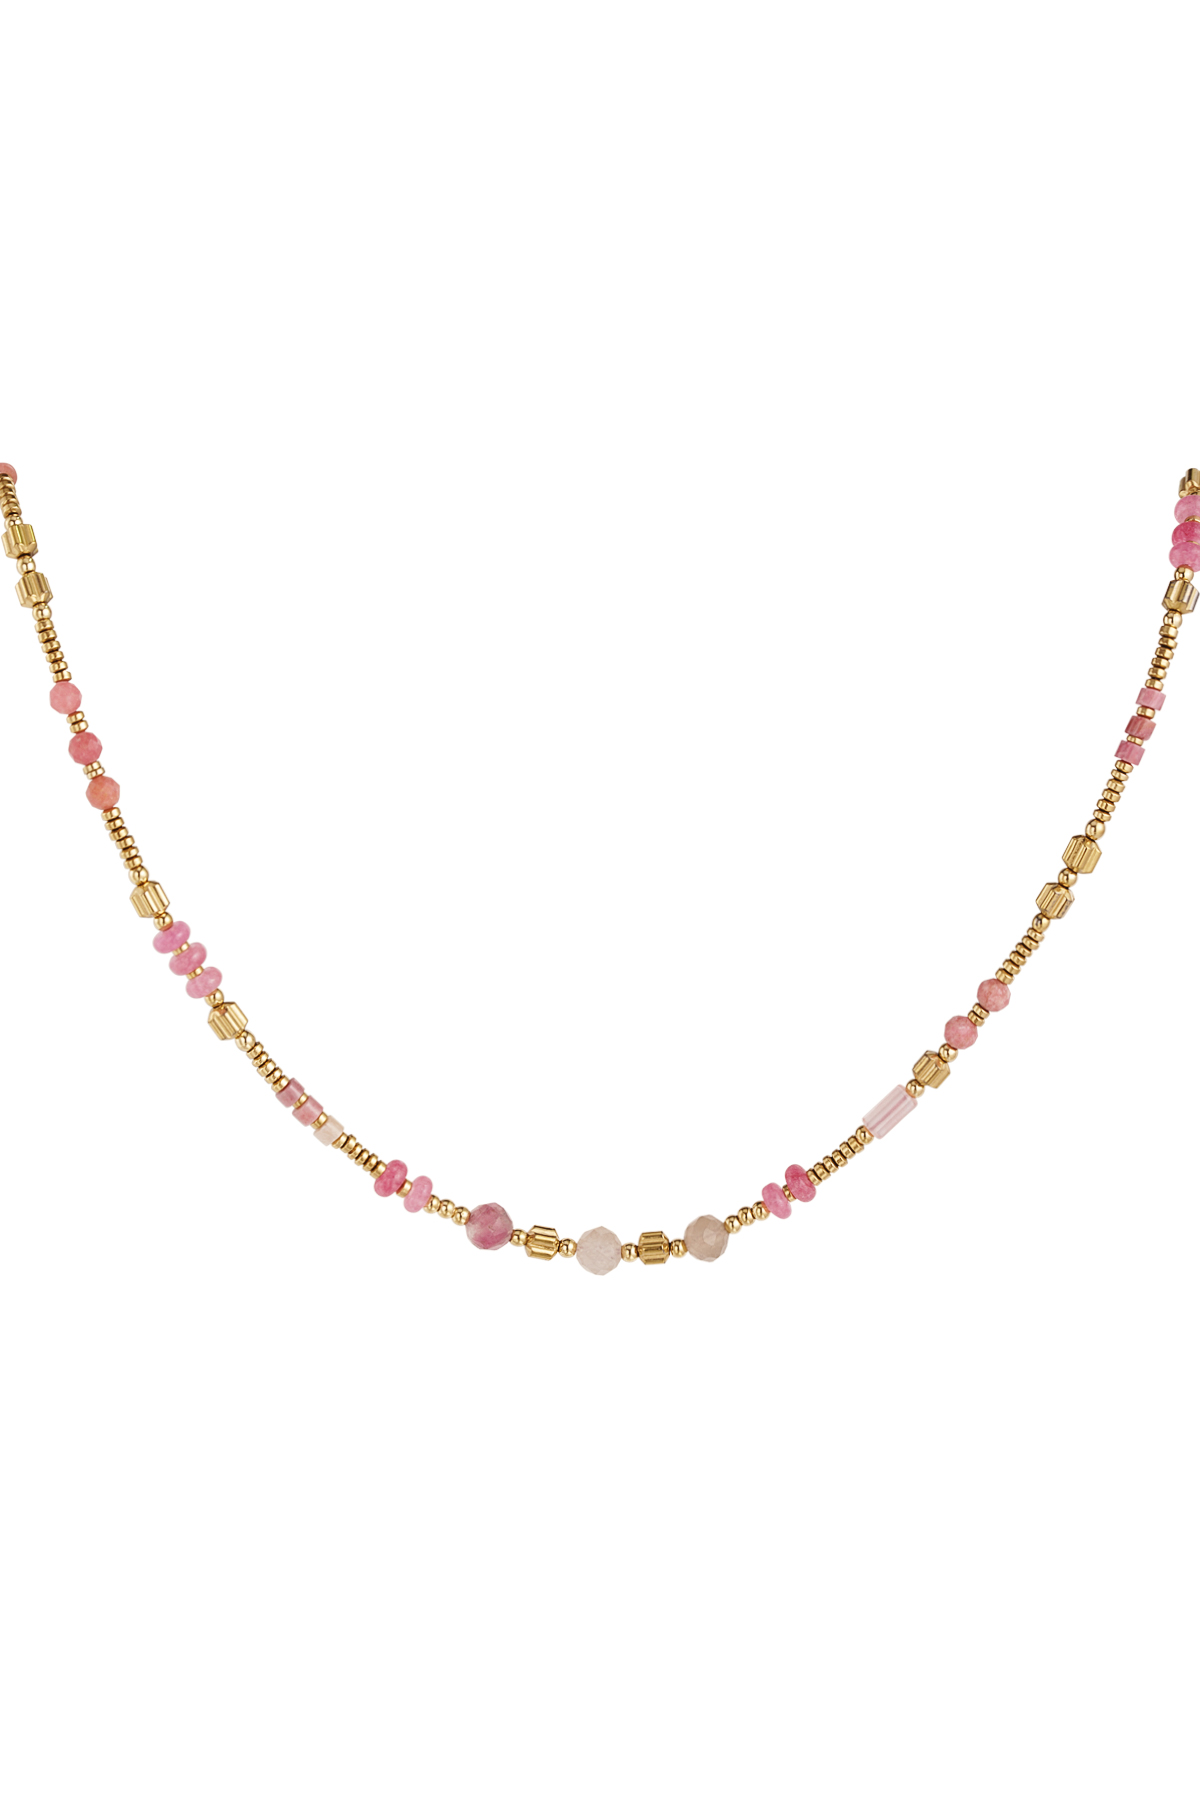 Necklace Stones &amp; Beads - Pink &amp; Gold Stainless Steel